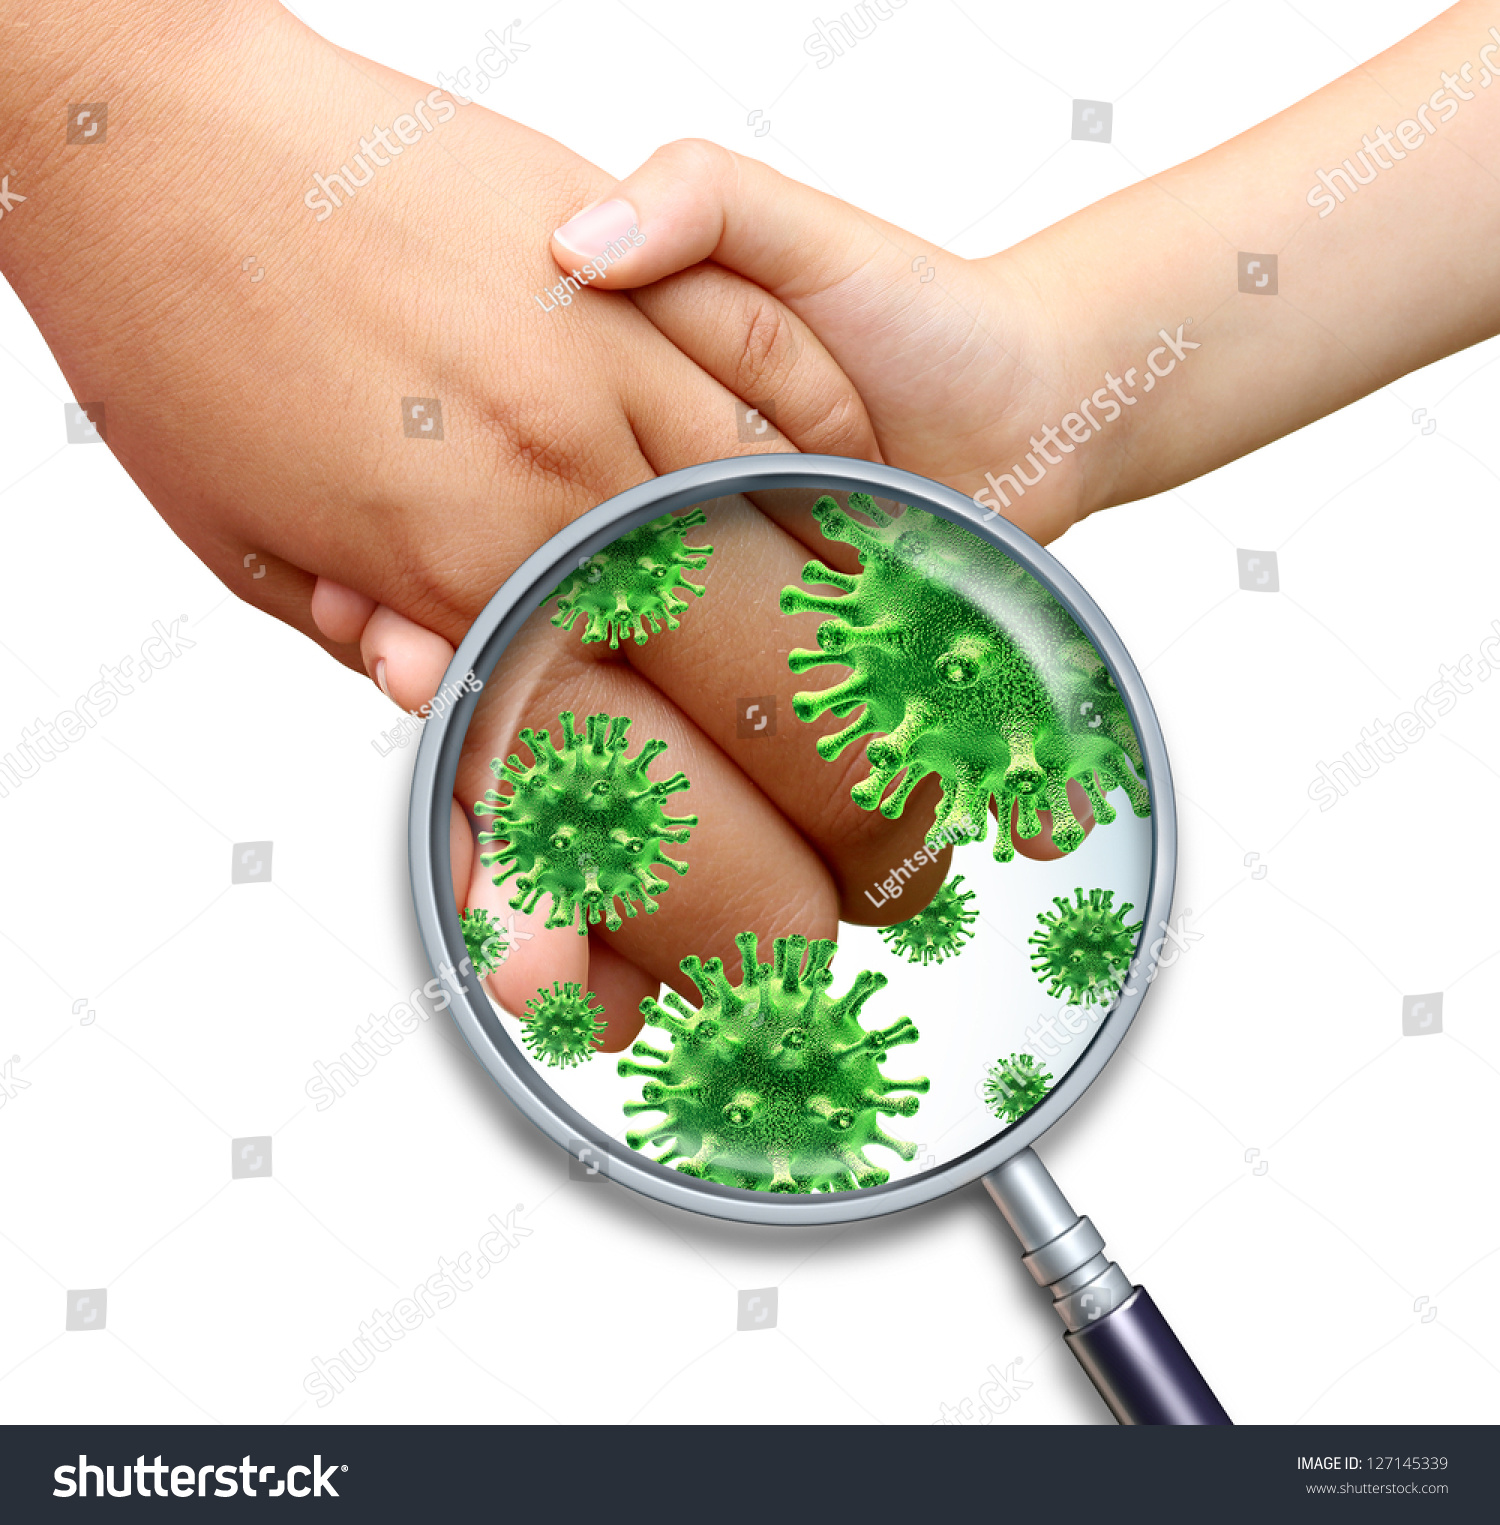 Contagious Virus Infection With Children Hands Holding And ...